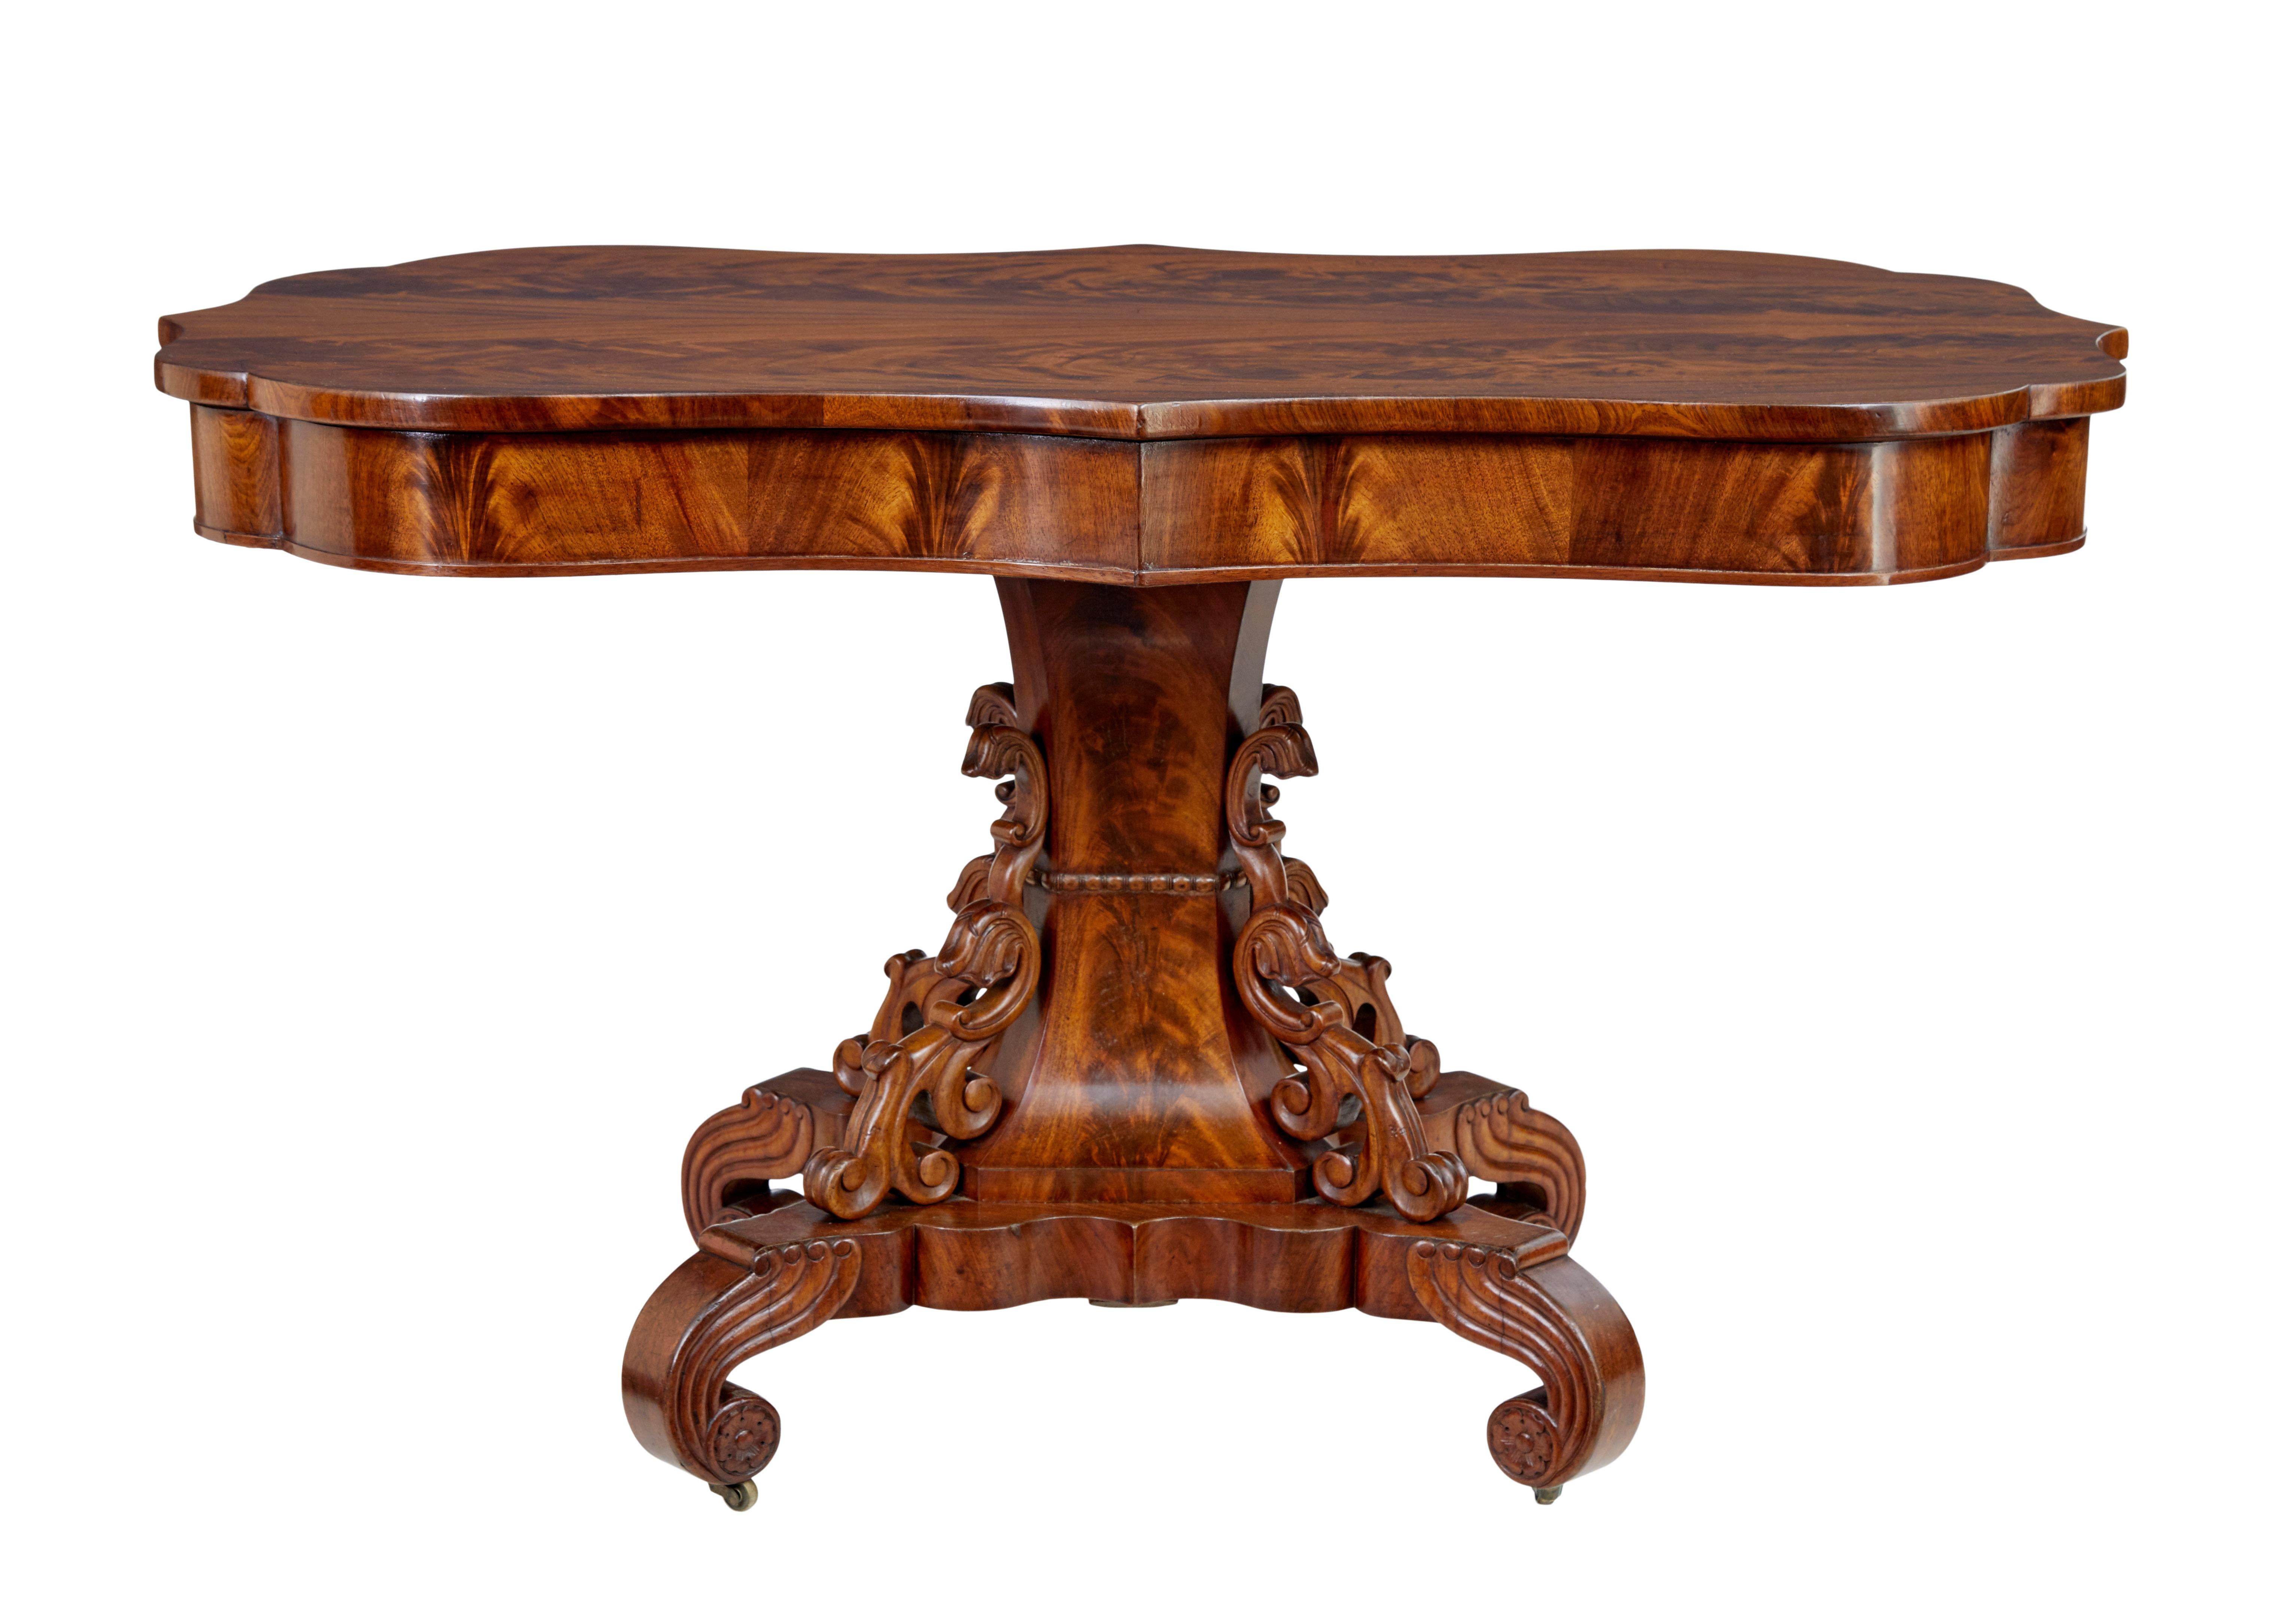 19th century Danish carved flame mahogany center table circa 1860.

Beautifully shaped top surface with striking half matching veneer top.  Slightly over-sailing top sits on an apron of the same shape.  Supported by a fluted steam which splays out